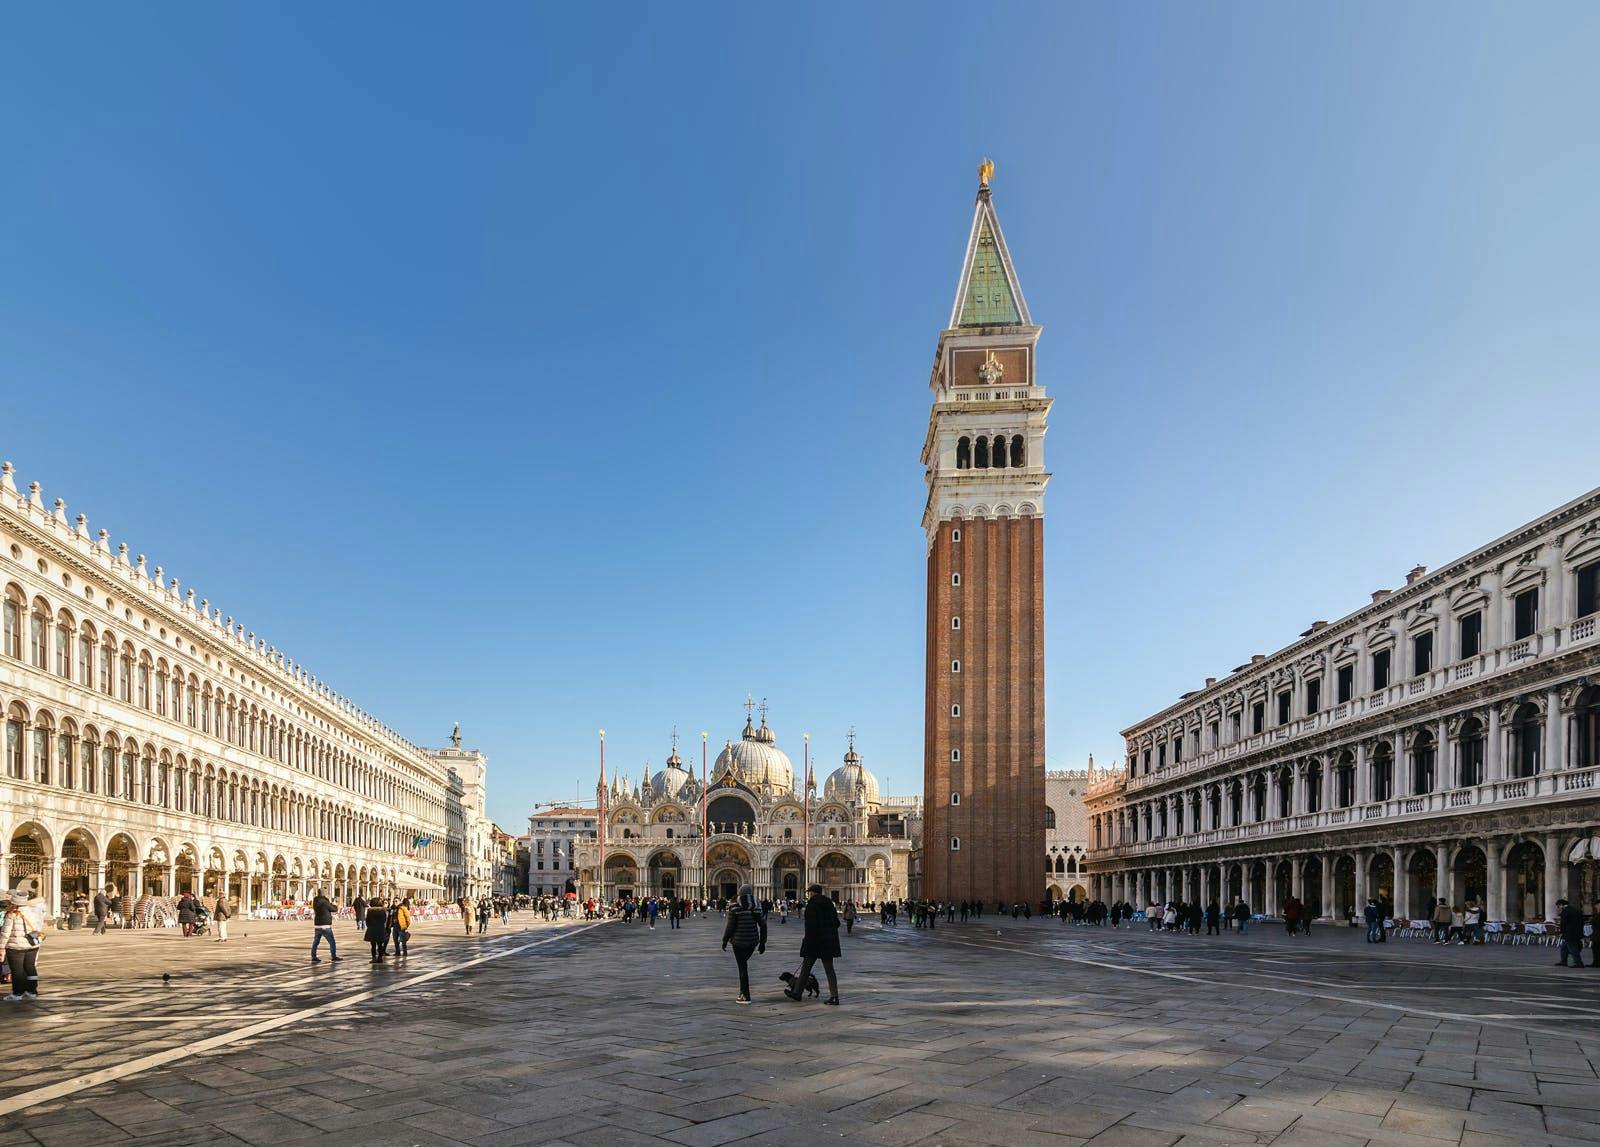 Guided tour of Doge's Palace and Golden Basilica with skip-the-line ticket